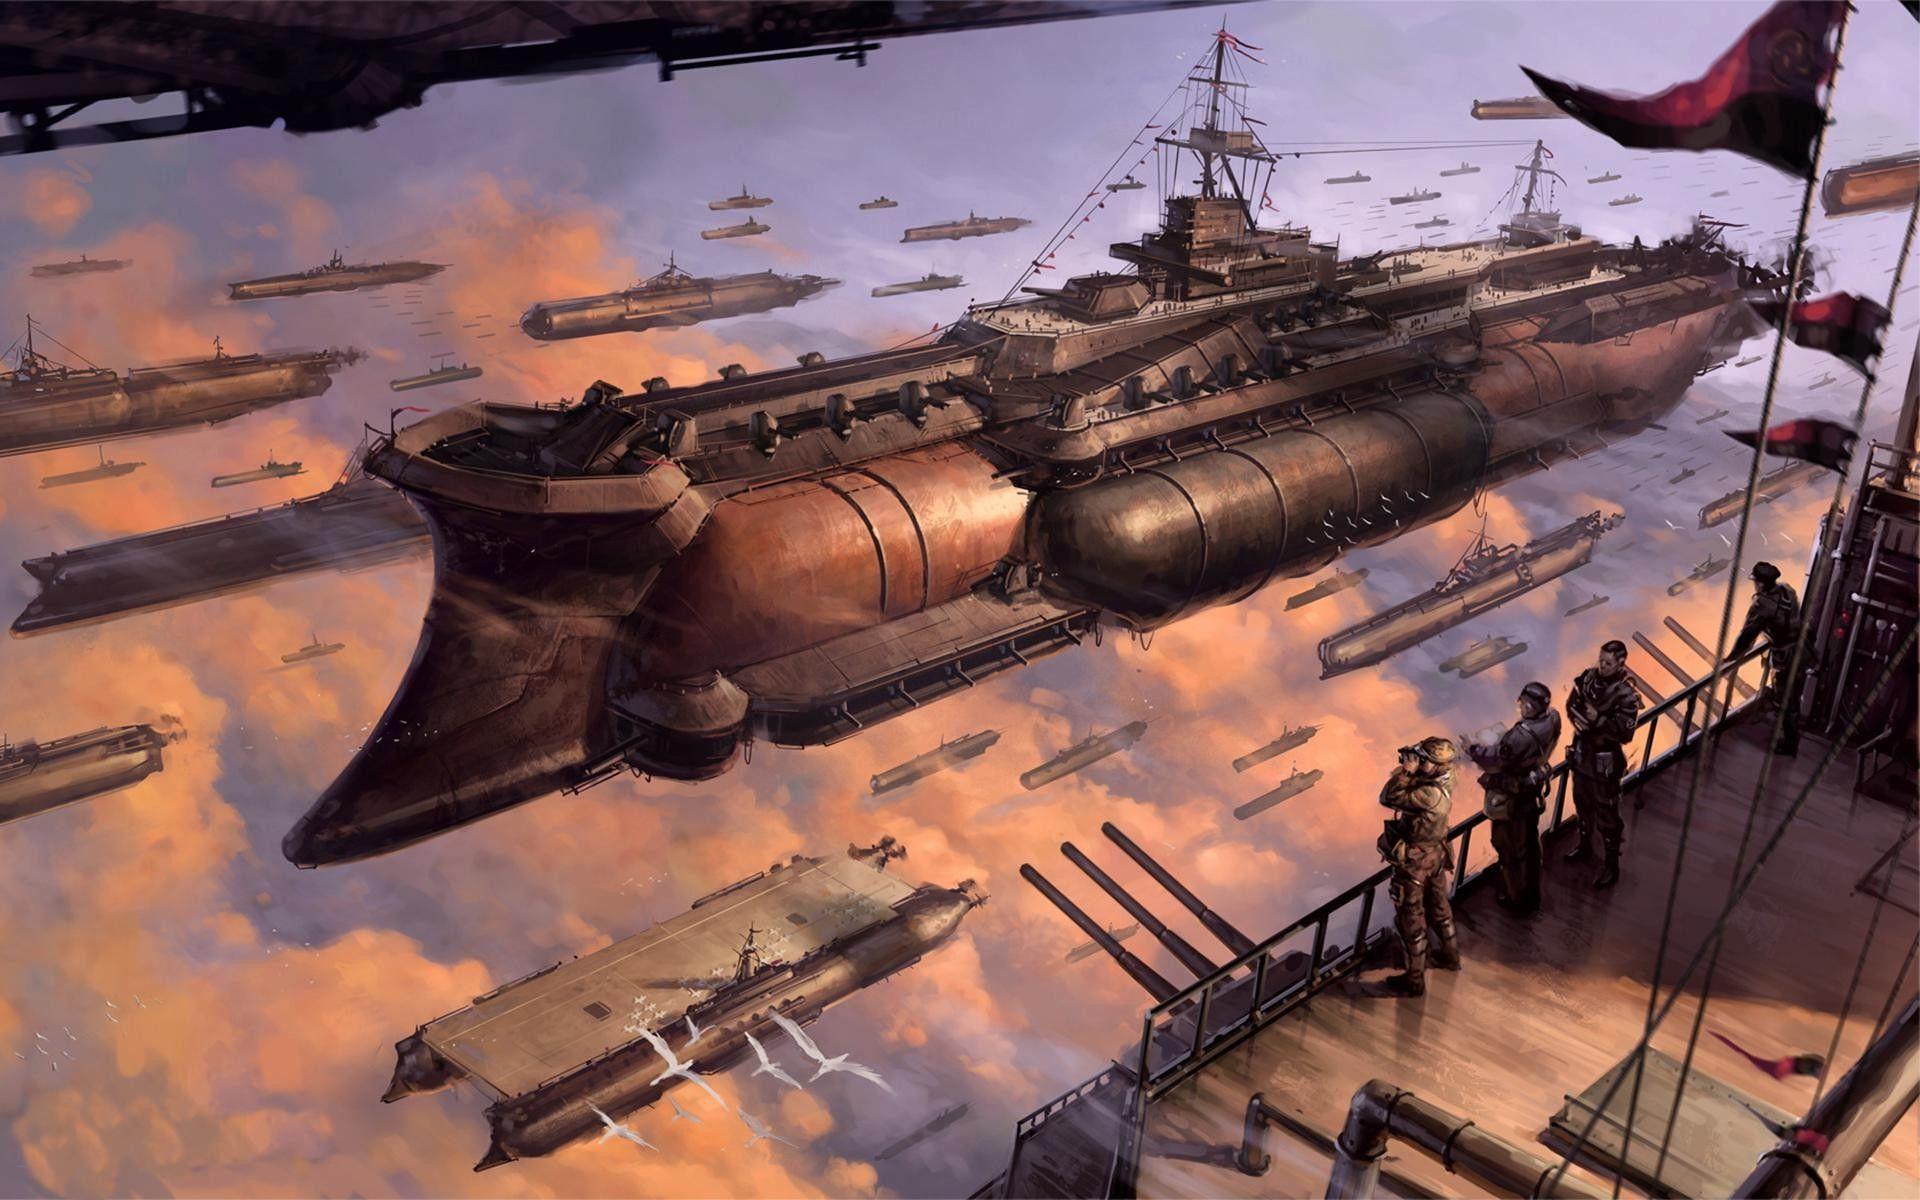 1920 x 1200 · jpeg - These Magical Flying Ship Illustrations Will Be Your New Desktops ...